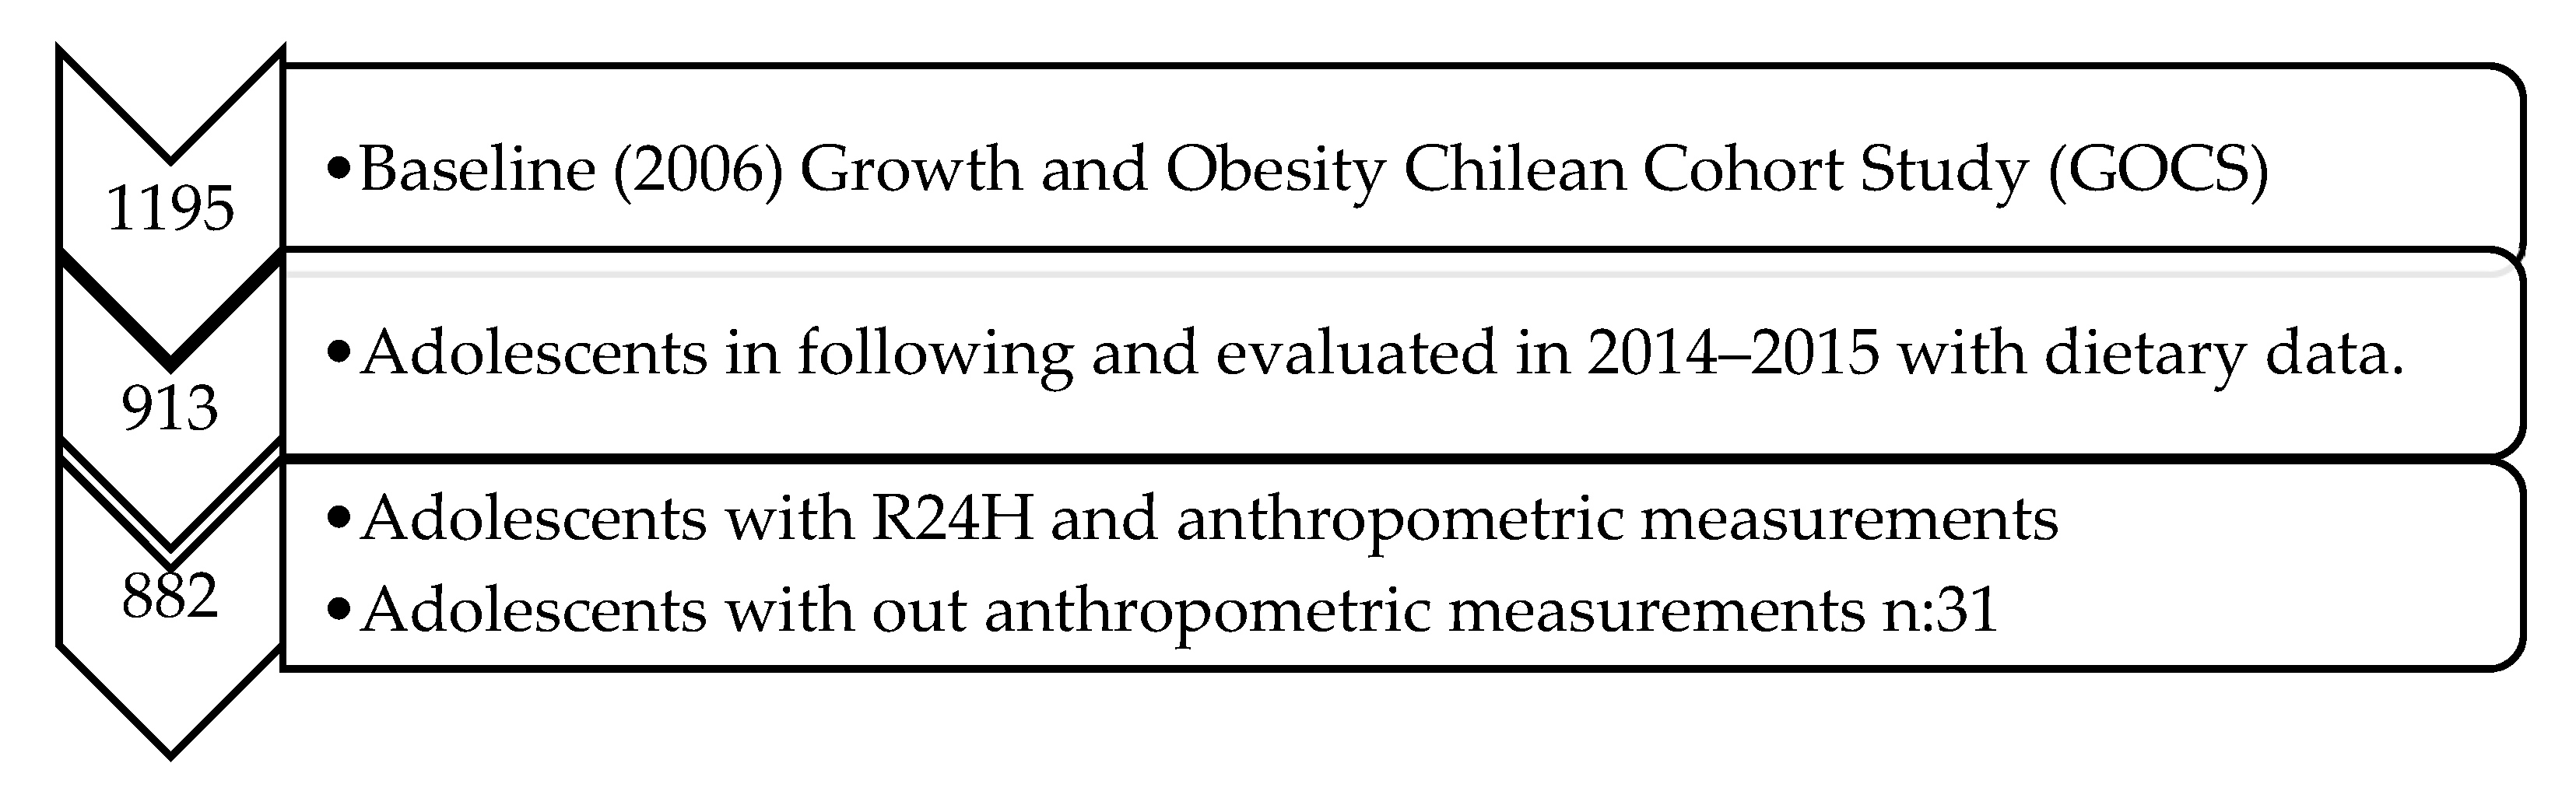 Nutrients | Free Full-Text | Dietary Patterns of Adolescents from the  Chilean Growth and Obesity Cohort Study Indicate Poor Dietary Quality